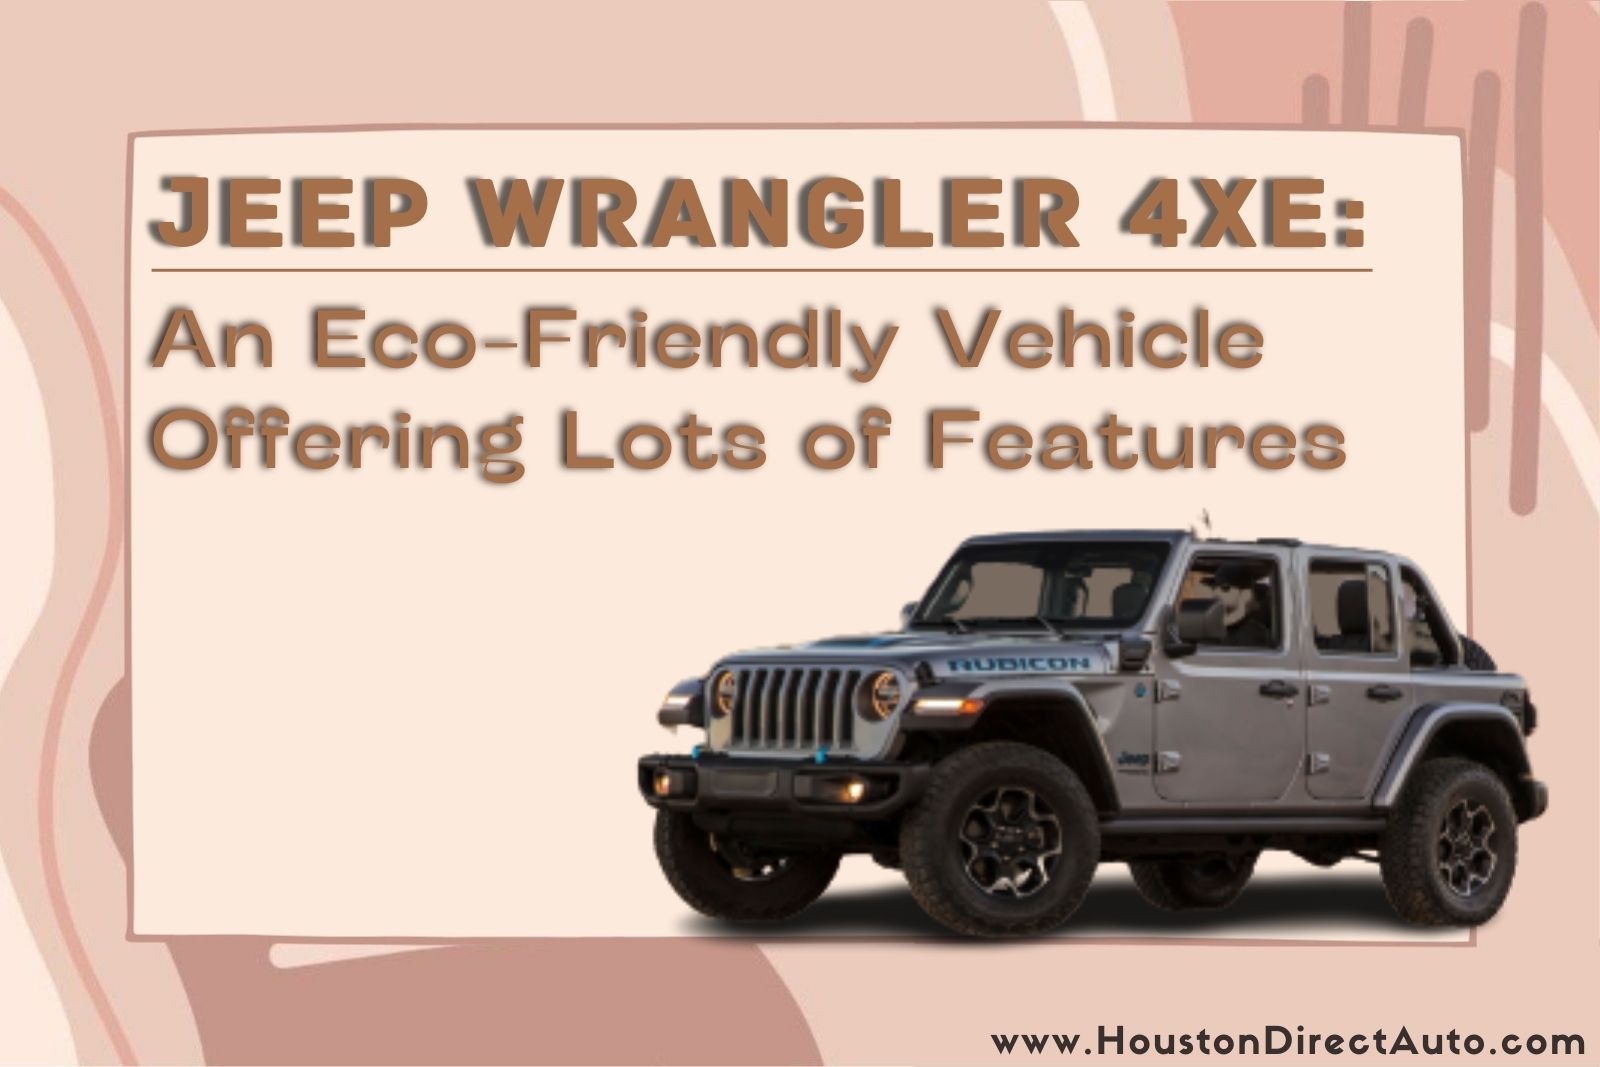 Pre Owned Jeeps For Sale In Houston TX, Used Jeeps For Sale In Houston TX, Used Car Dealerships, Used Car Dealer Near Me, Used Vehicles Near Me